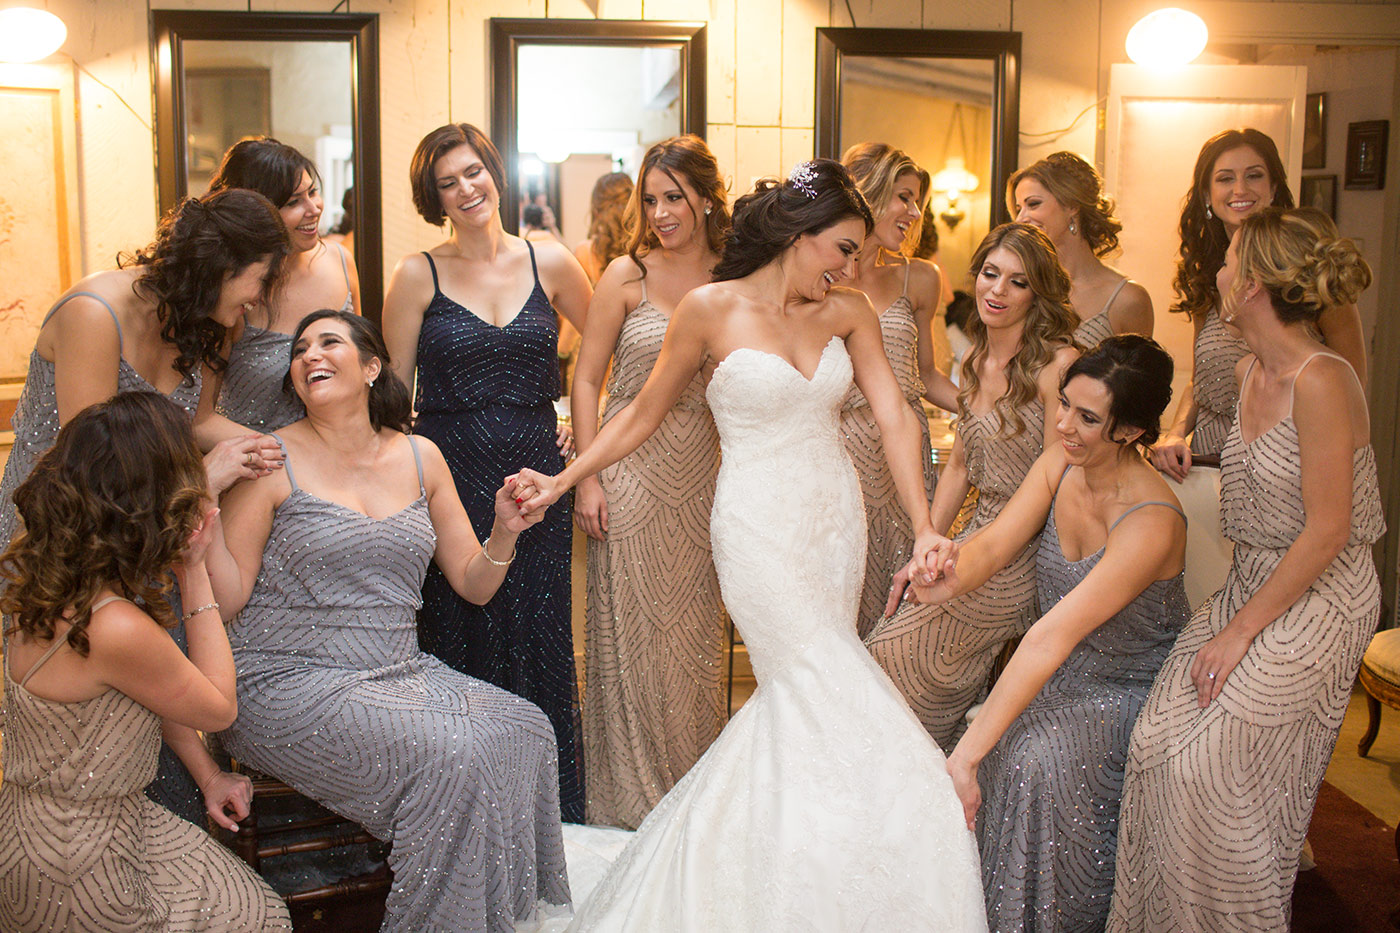 The image shows the bride and her bridesmaids getting ready for the wedding in the Chapel at the Union Hill Inn in Sonora, California. The women are standing together in the chapel, which features wooden beams, stained glass windows, and a rustic chandelier. The bride is wearing an elegant white gown, while the bridesmaids are dressed in matching burgundy dresses. They are all smiling and appear to be excited as they prepare for the wedding. The image showcases the beauty of the venue and captures the joyous atmosphere of the occasion.